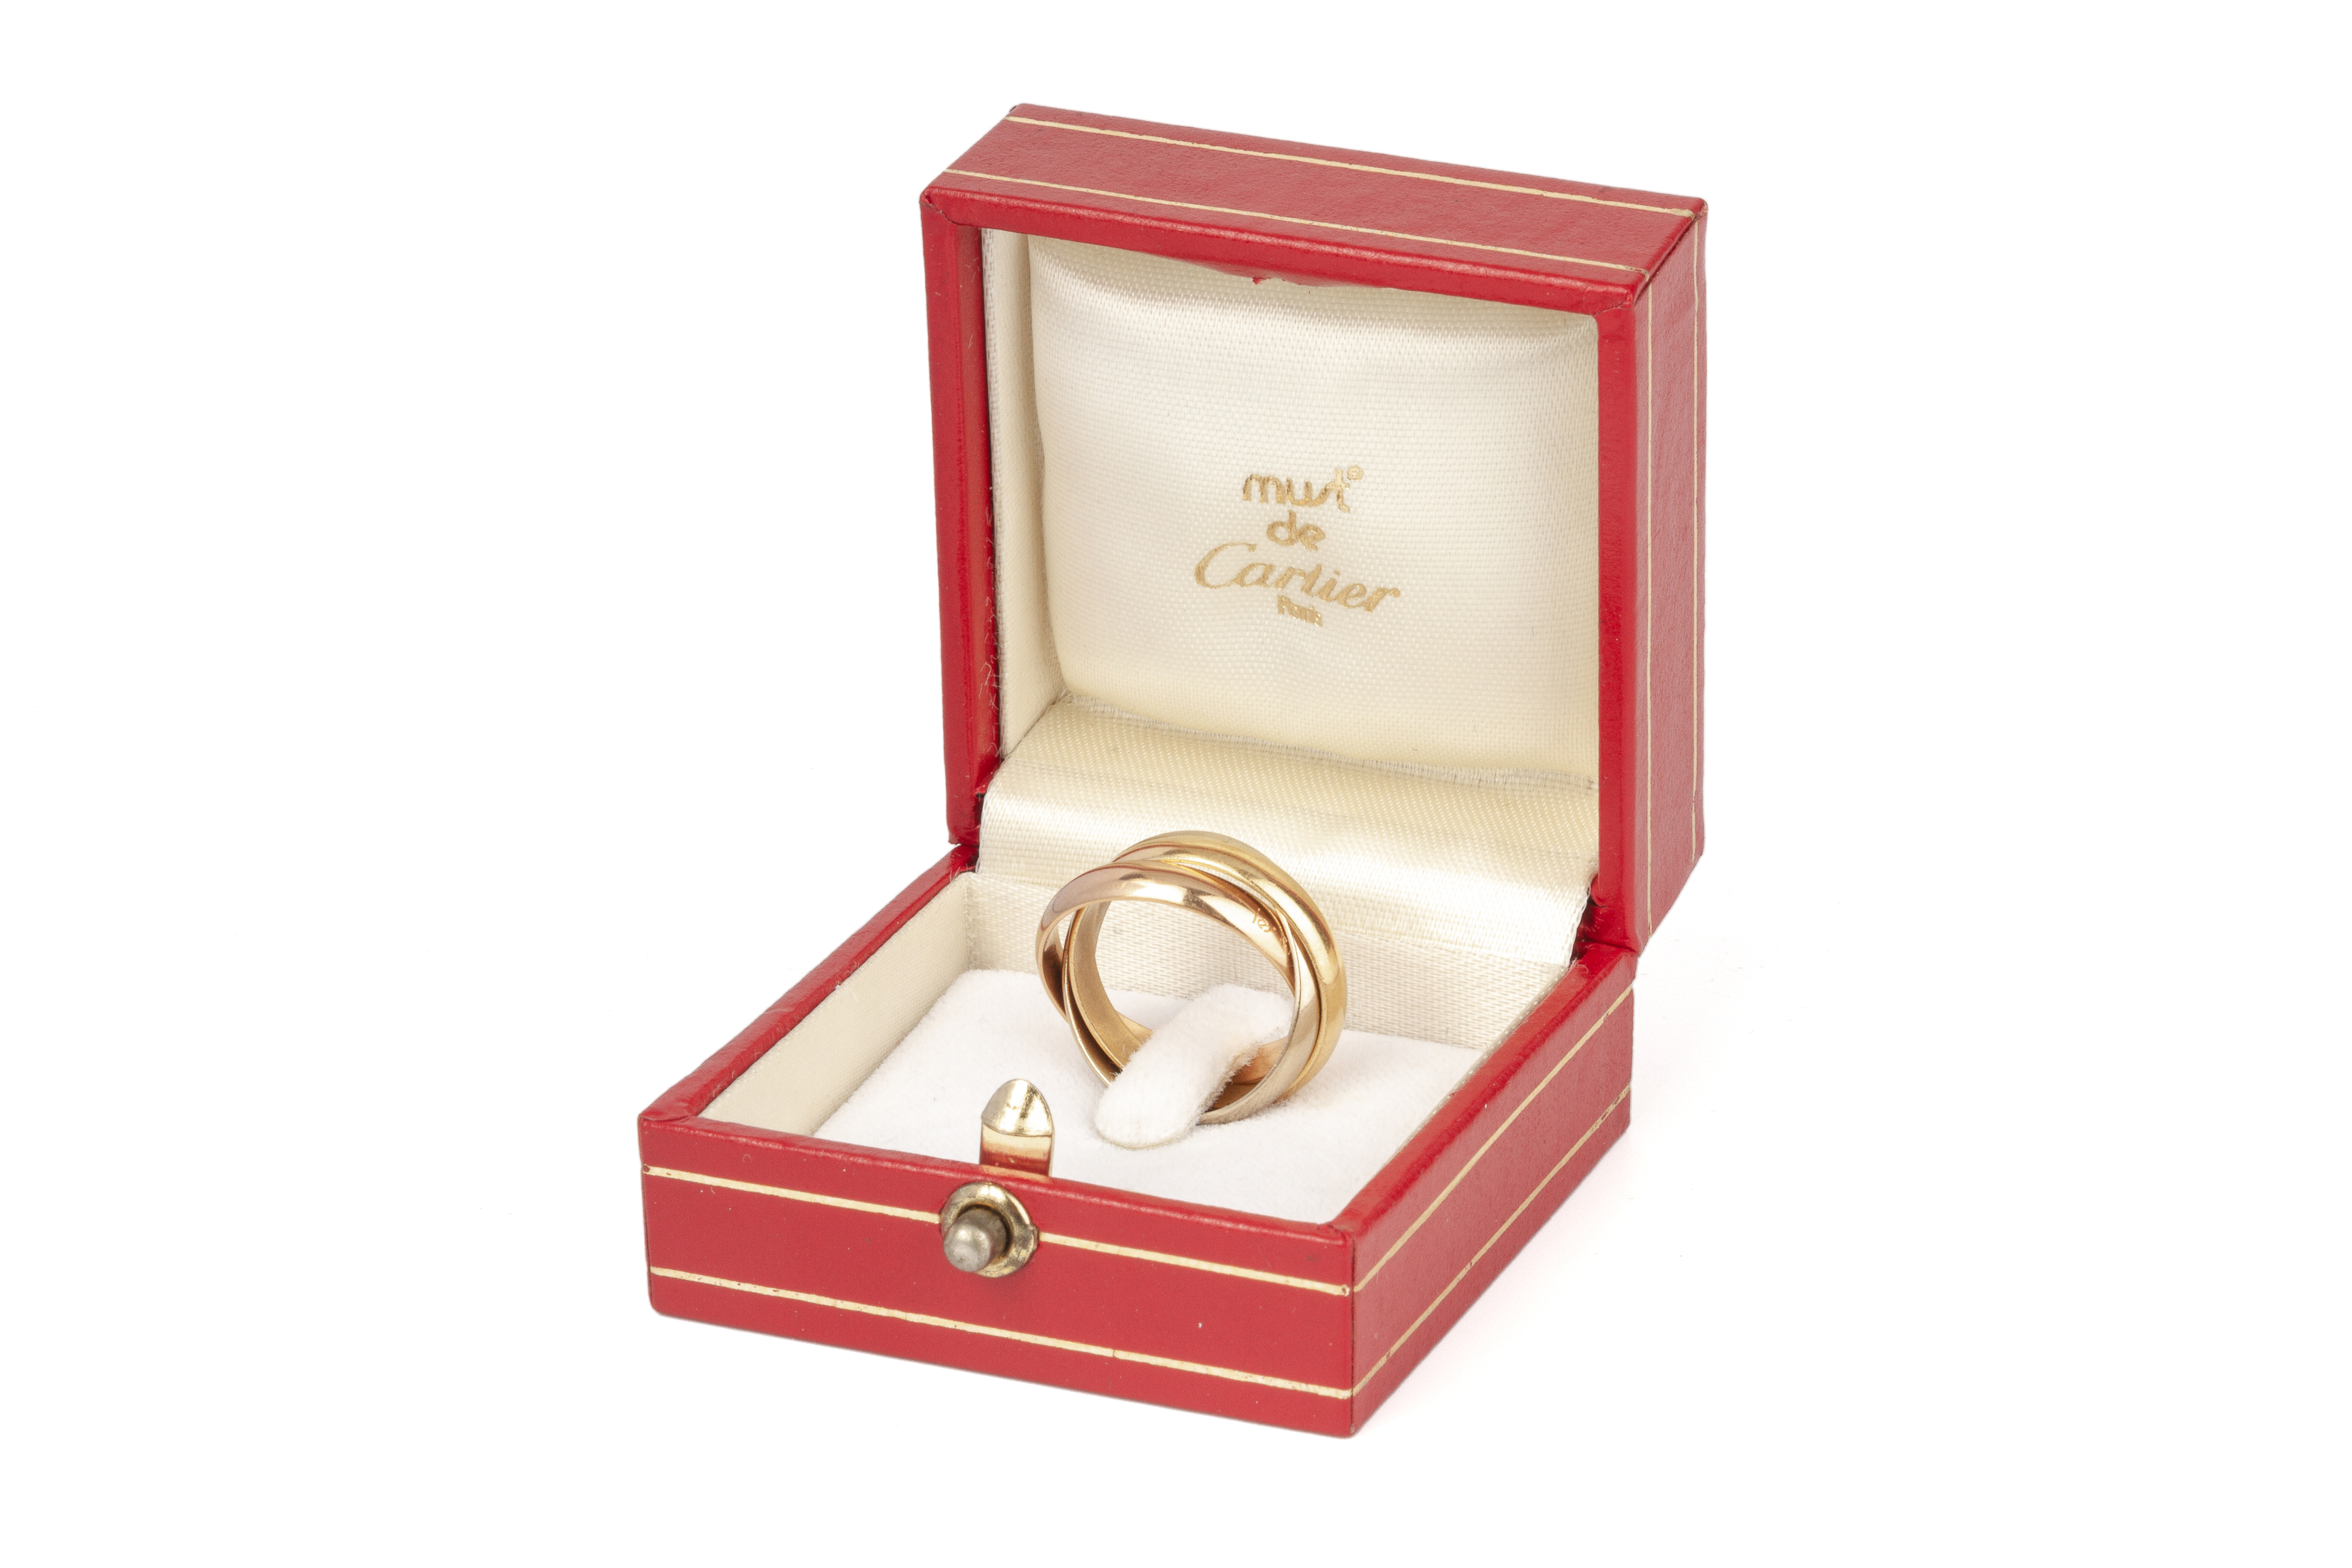 A MUST DE CARTIER GOLD 'TRINITY' RING - Image 2 of 3